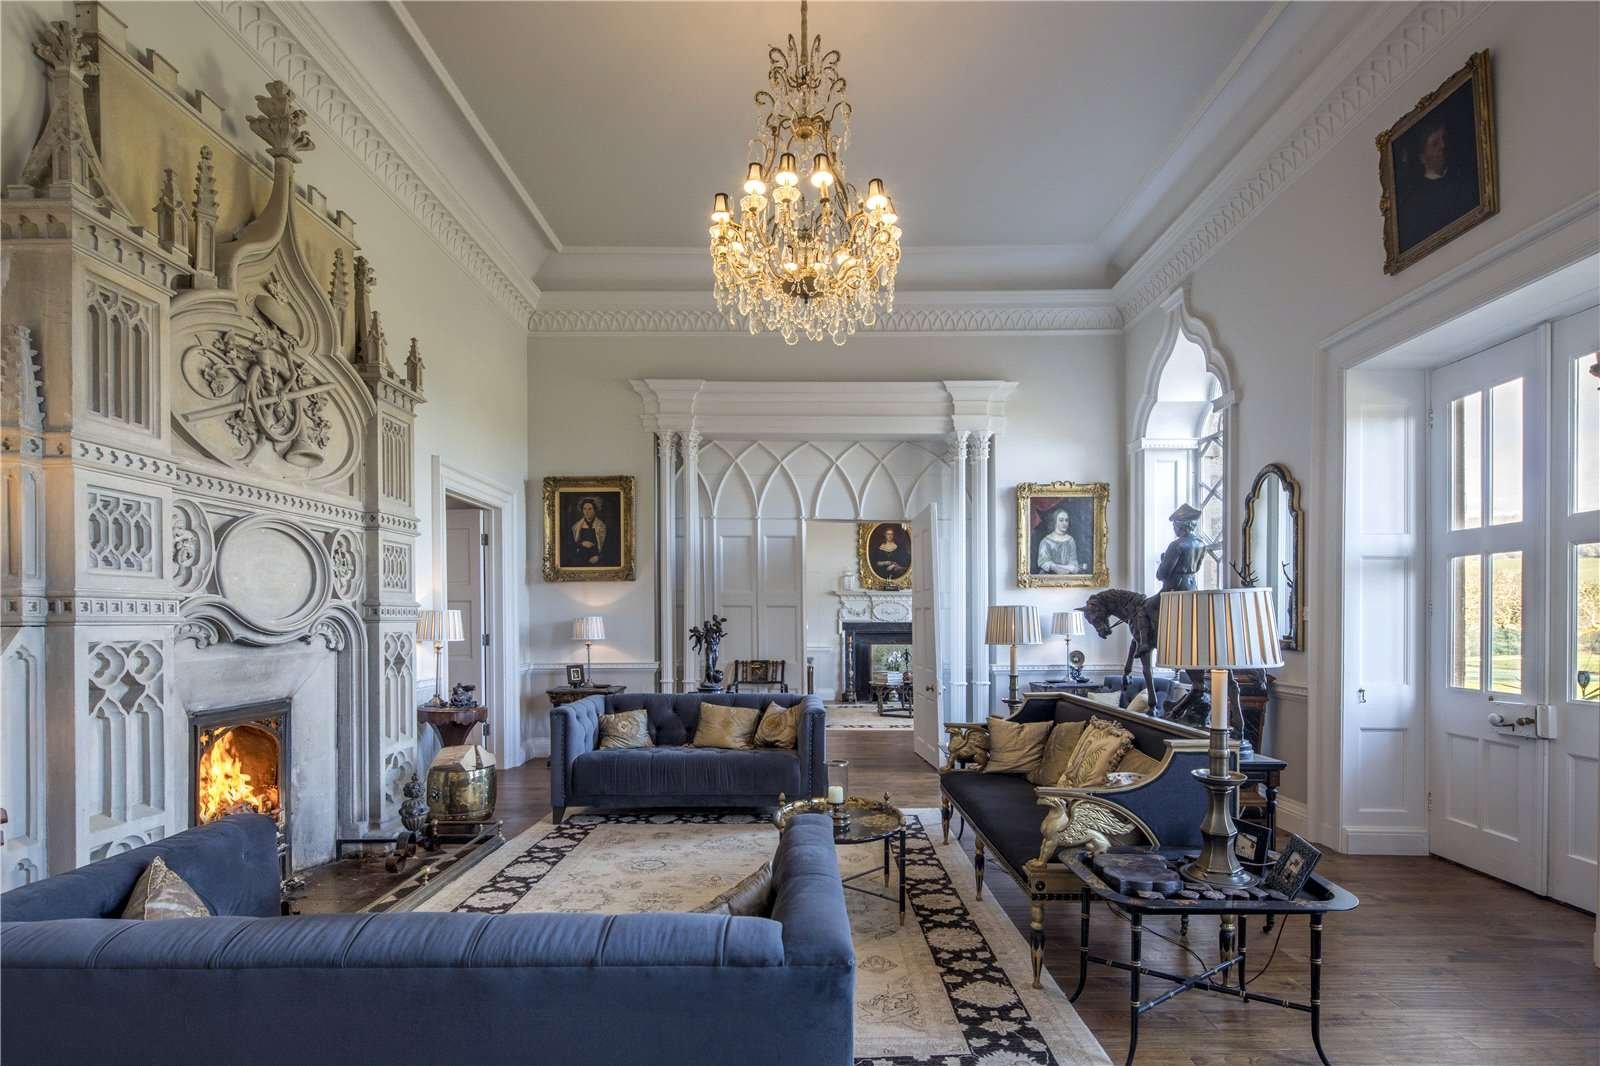 Francis York Rare Georgian Gothic-Style Country House in the Cotswolds is Under Offer  4.jpg